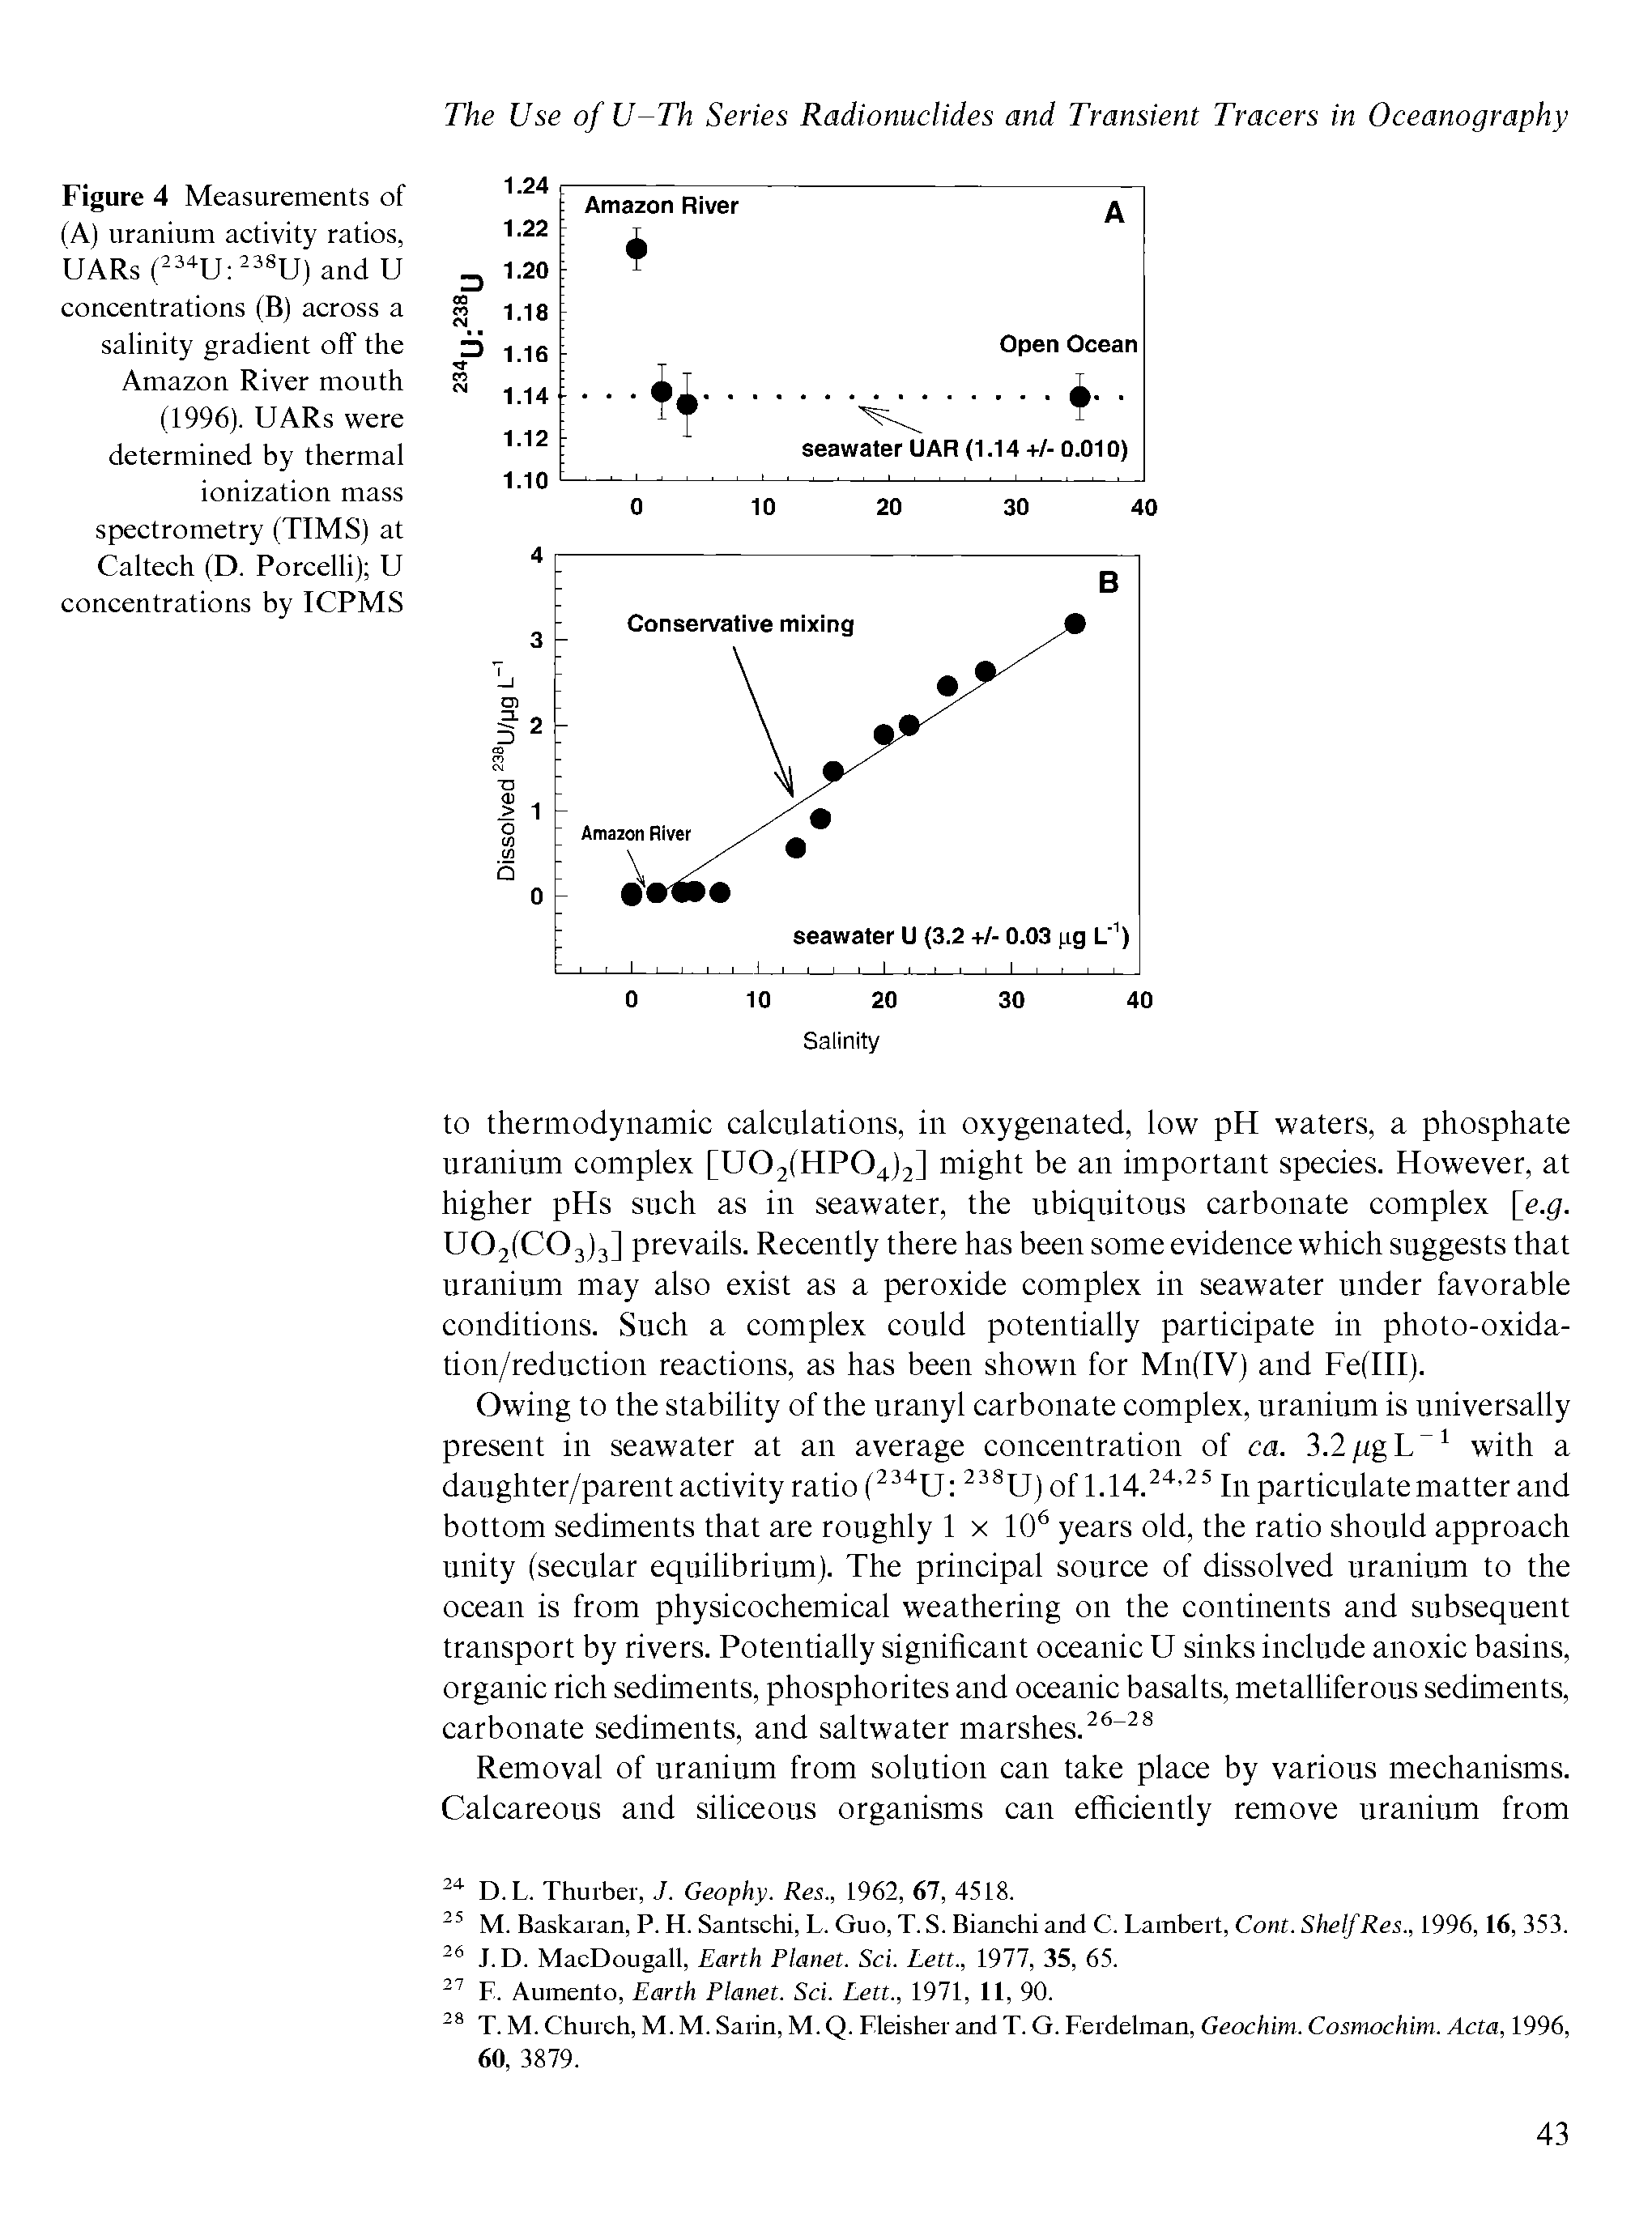 Figure 4 Measurements of (A) uranium aetivity ratios, UARs ( U U) and U eoneentrations (B) aeross a salinity gradient off the Amazon River mouth (1996). UARs were determined by thermal ionization mass speetrometry (TIMS) at Calteeh (D. Poreelli) U eoneentrations by ICPMS...